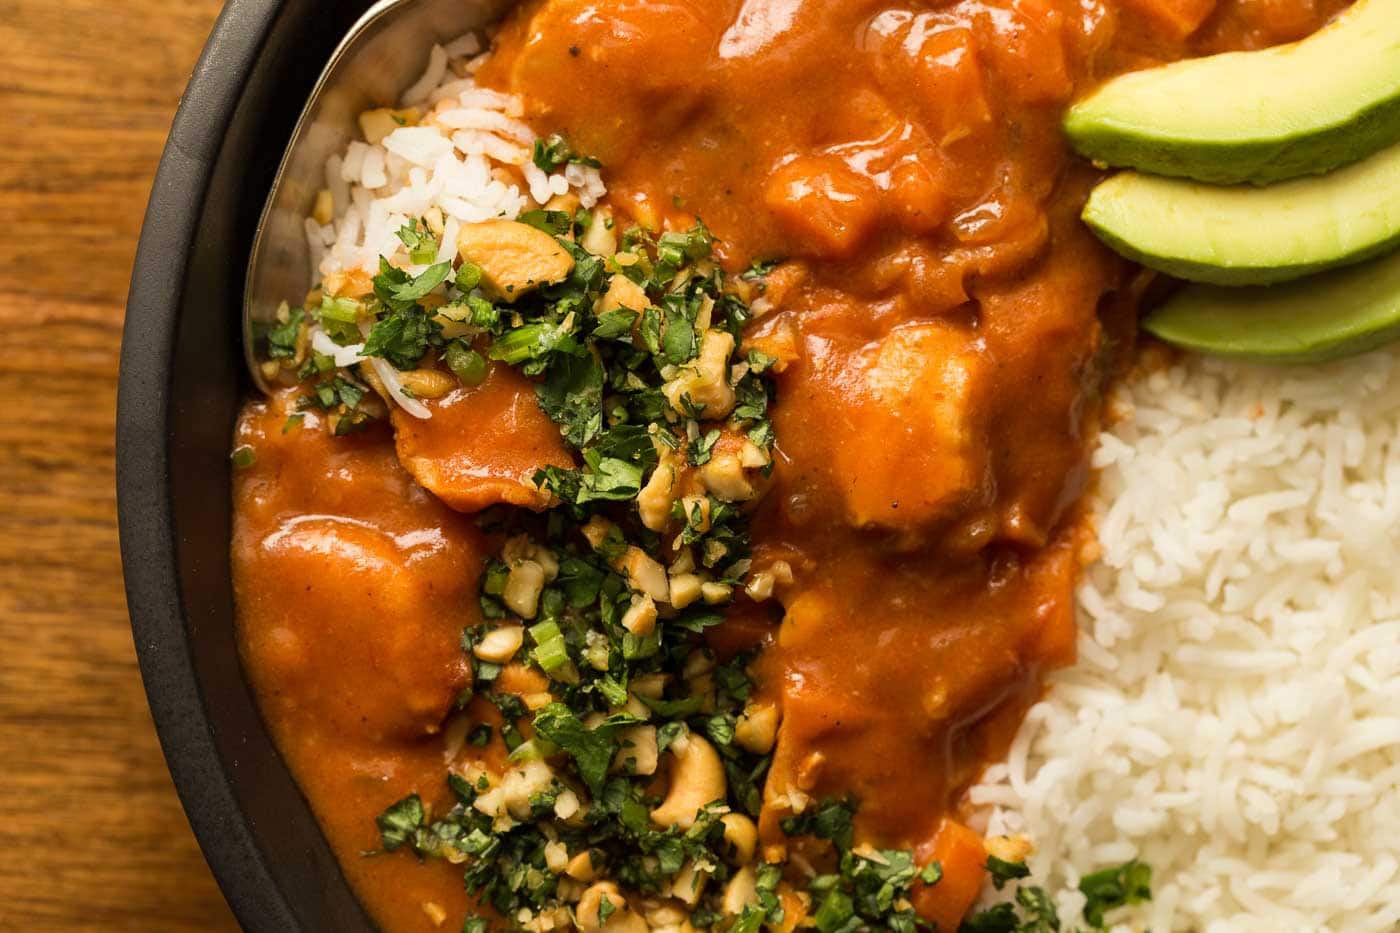 Extreme overhead closeup of a bowl of Slow Cooker Indian Butter Chicken.